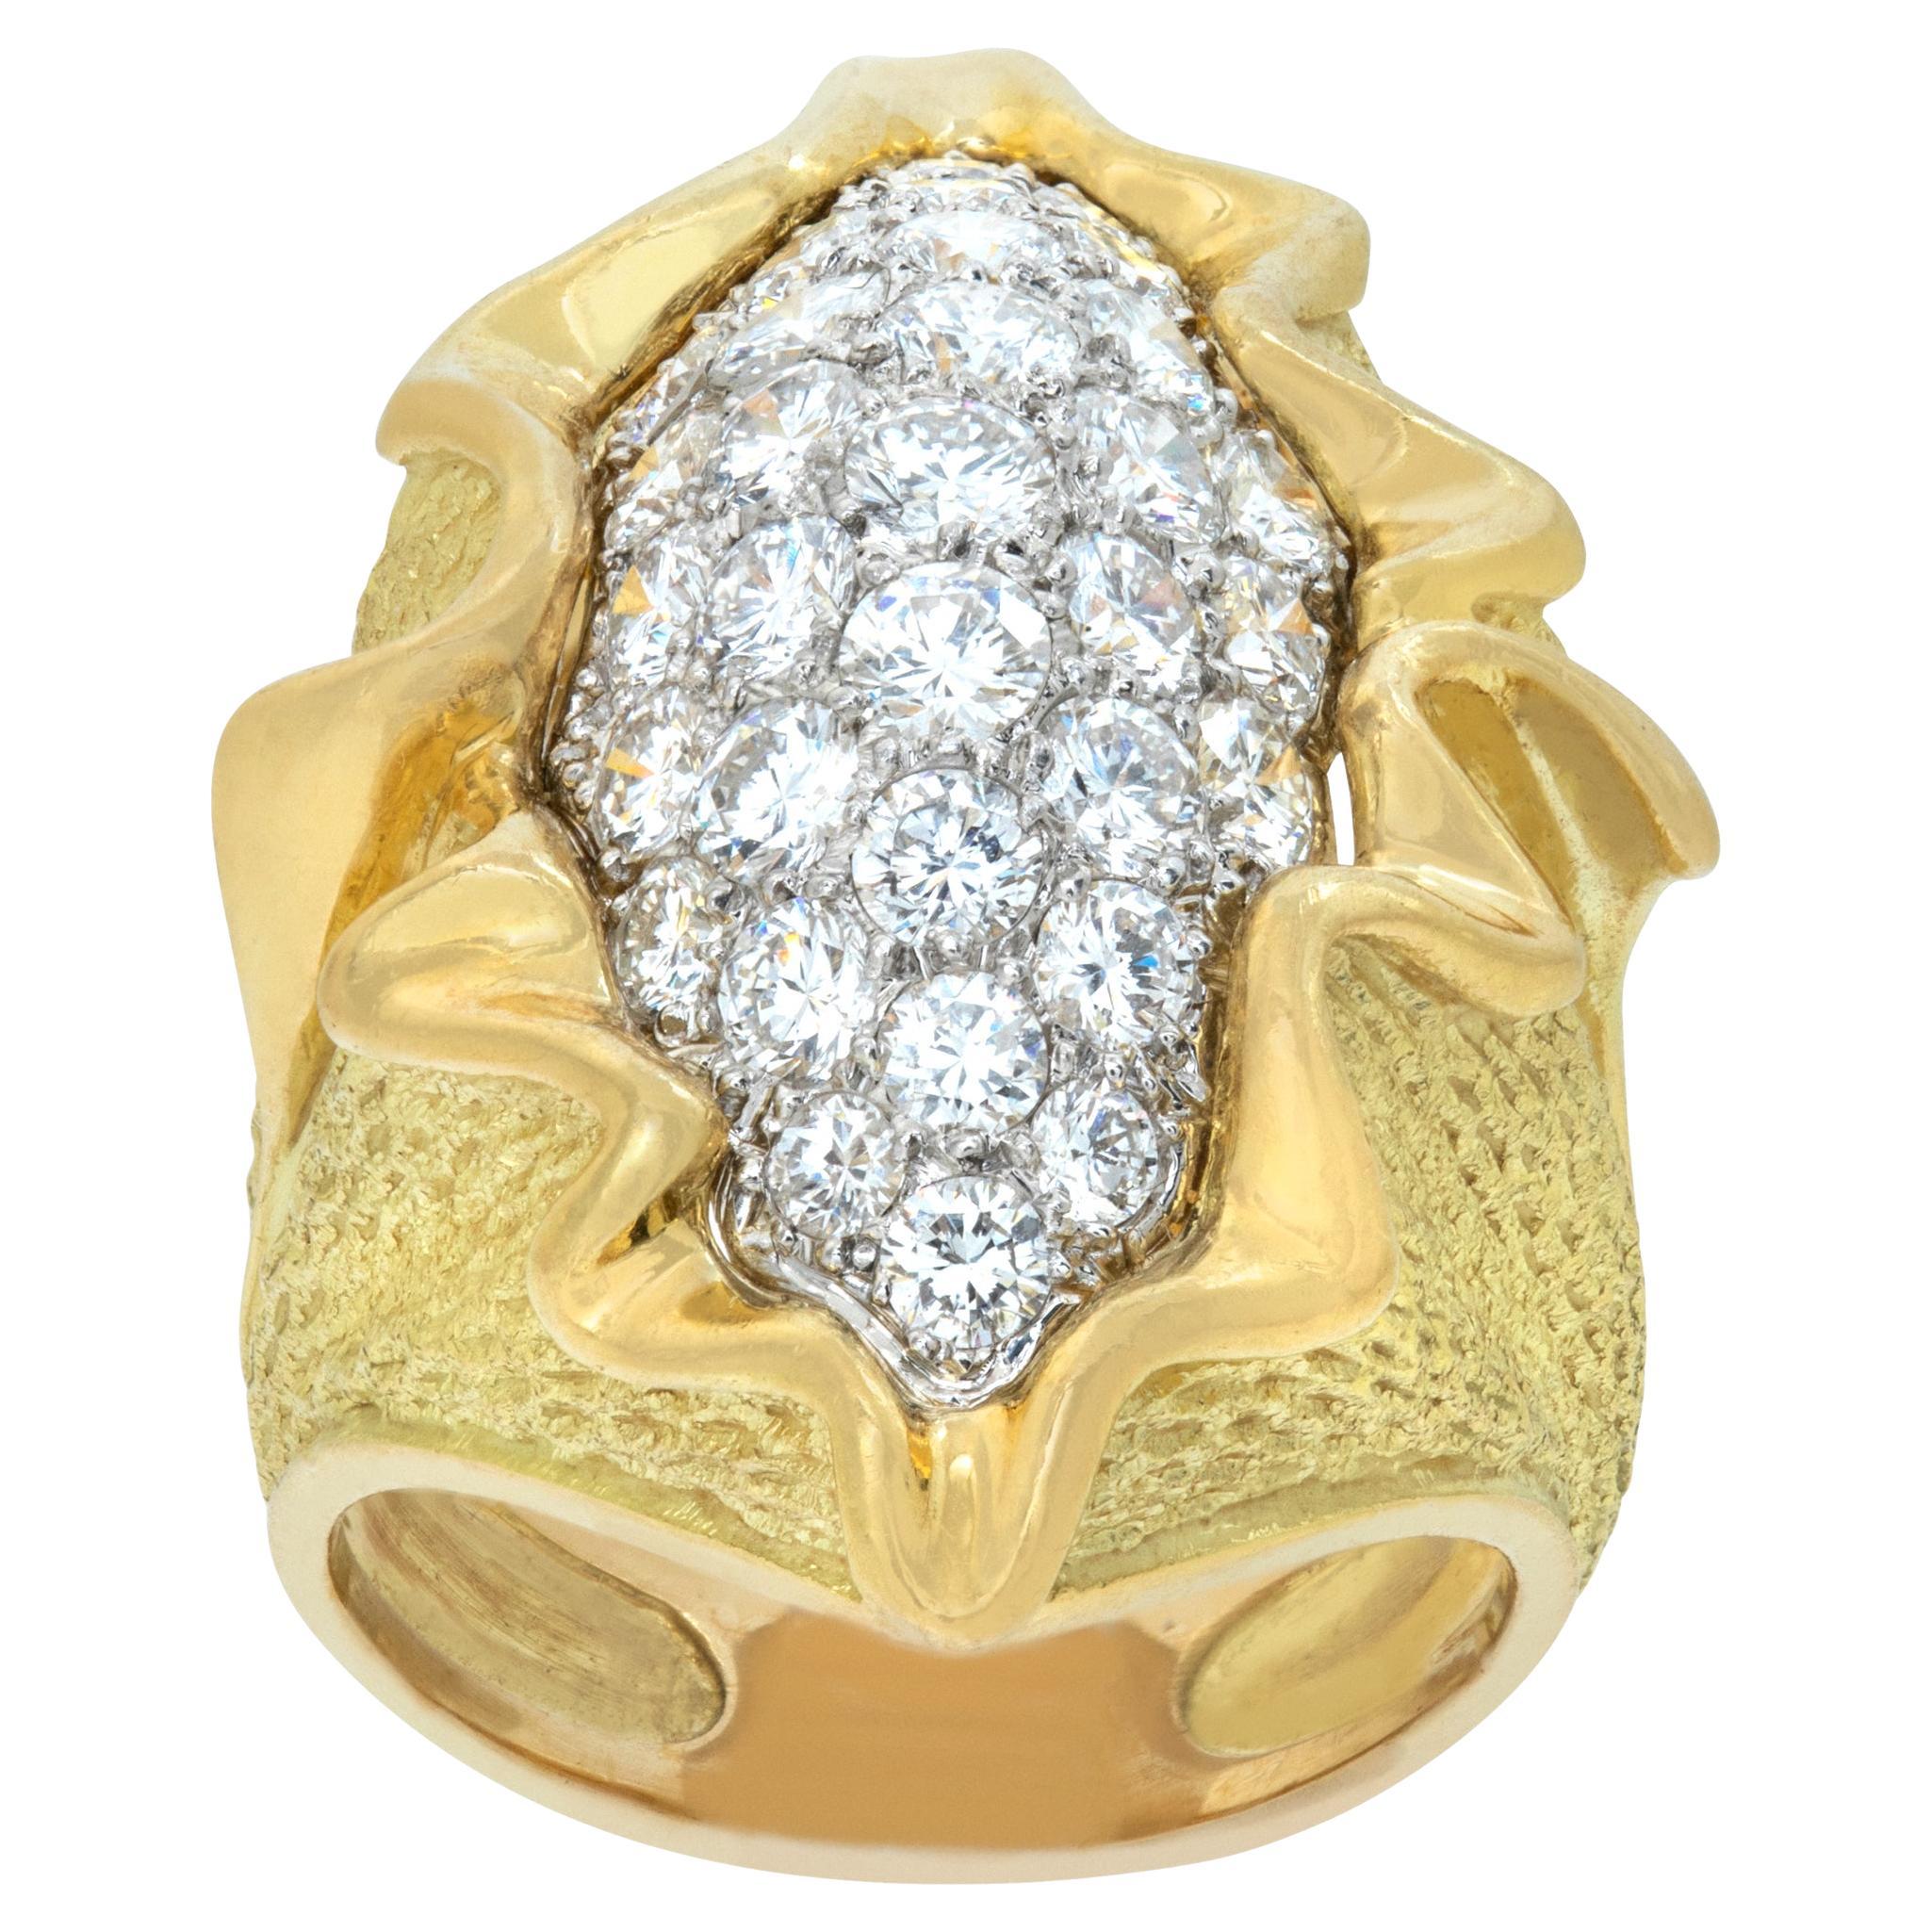 Wave ring with round brilliant cut diamonds set in yellow and white gold.